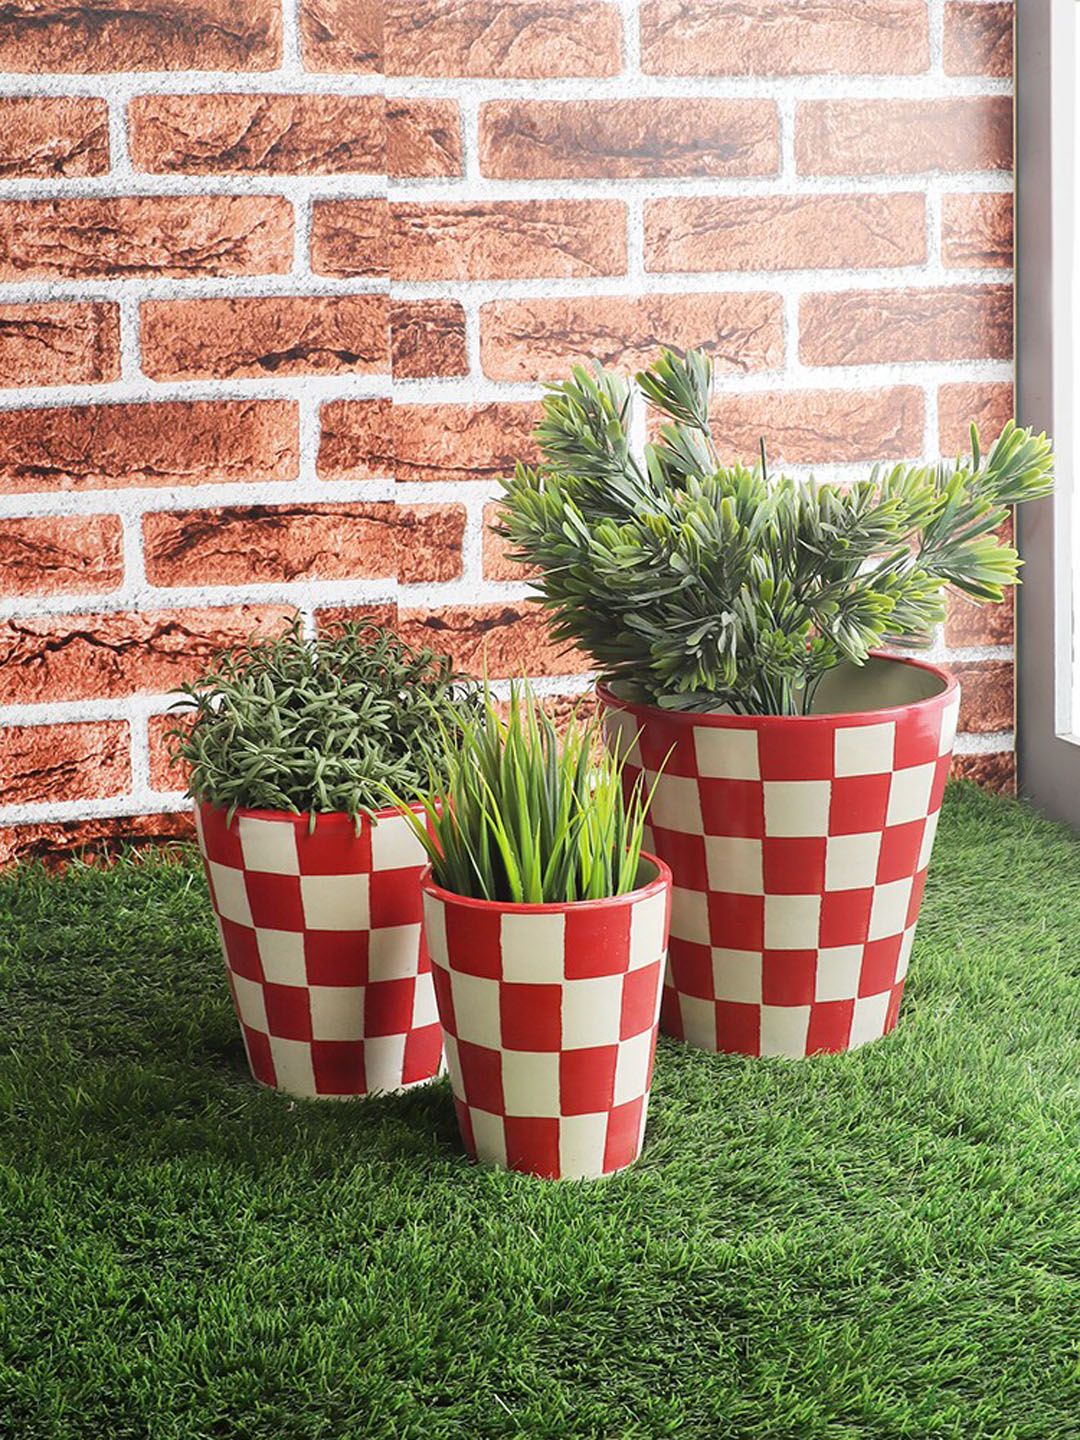 The Decor Mart Set Of 3 White & Red Checked Ceramic Planters Price in India